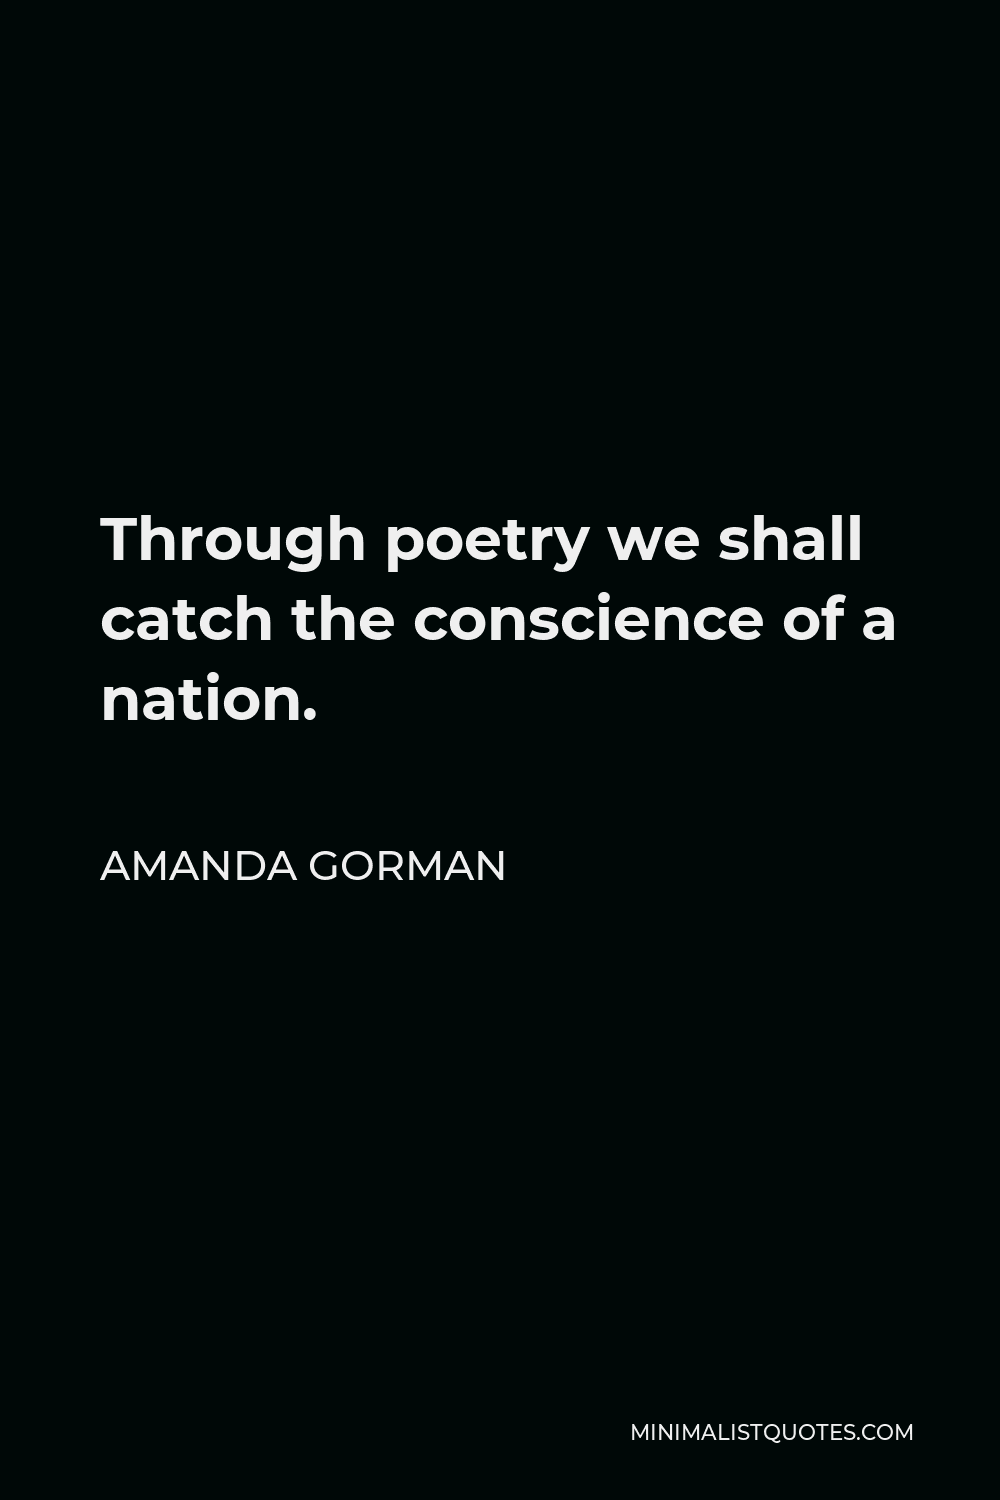 Amanda Gorman Quote - Through poetry we shall catch the conscience of a nation.